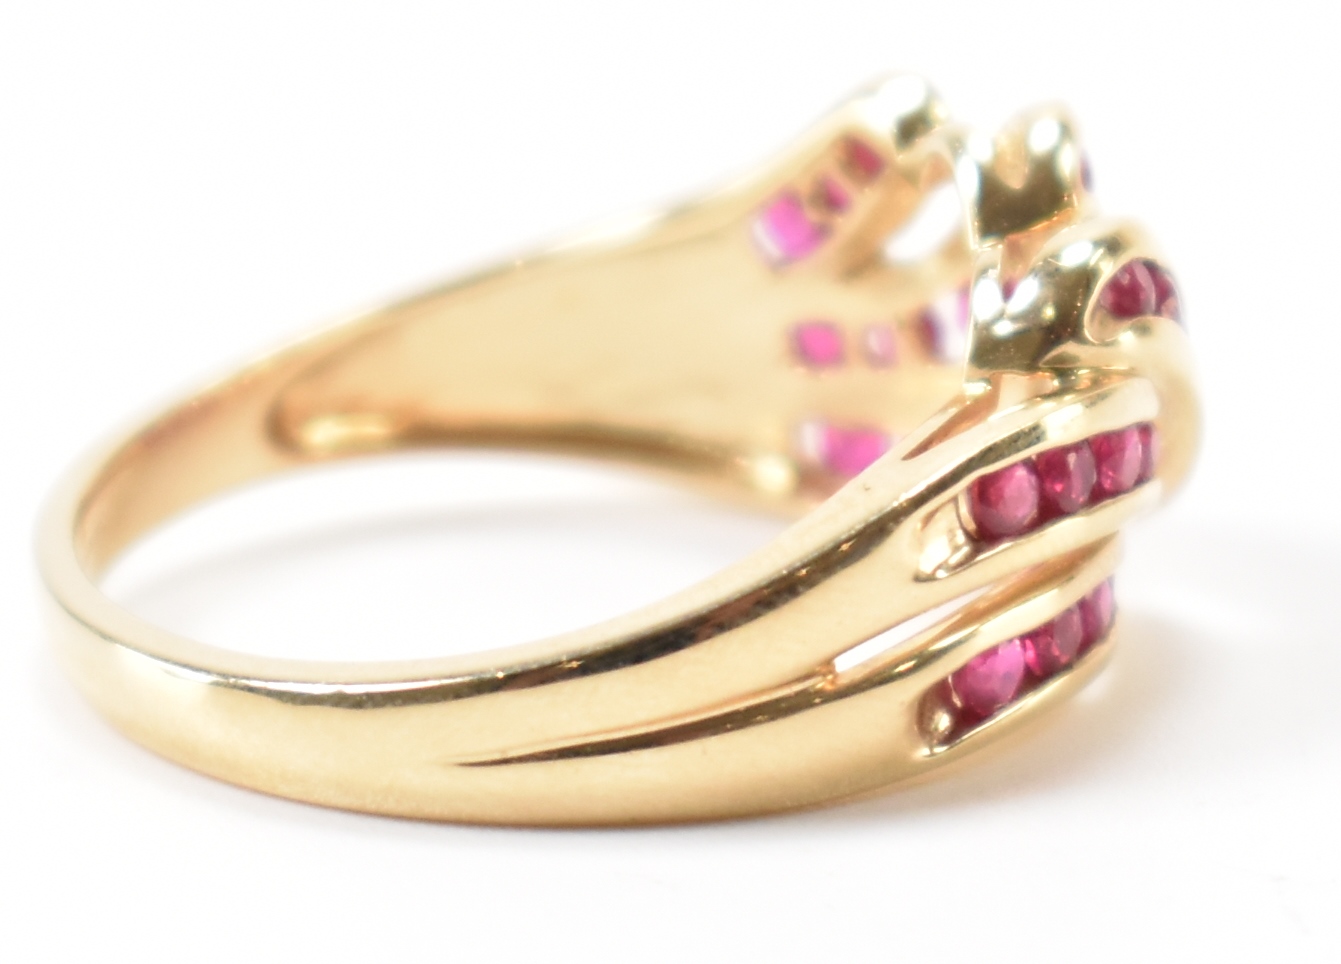 HALLMARKED 9CT GOLD & RUBY CROSSOVER RING - Image 5 of 8